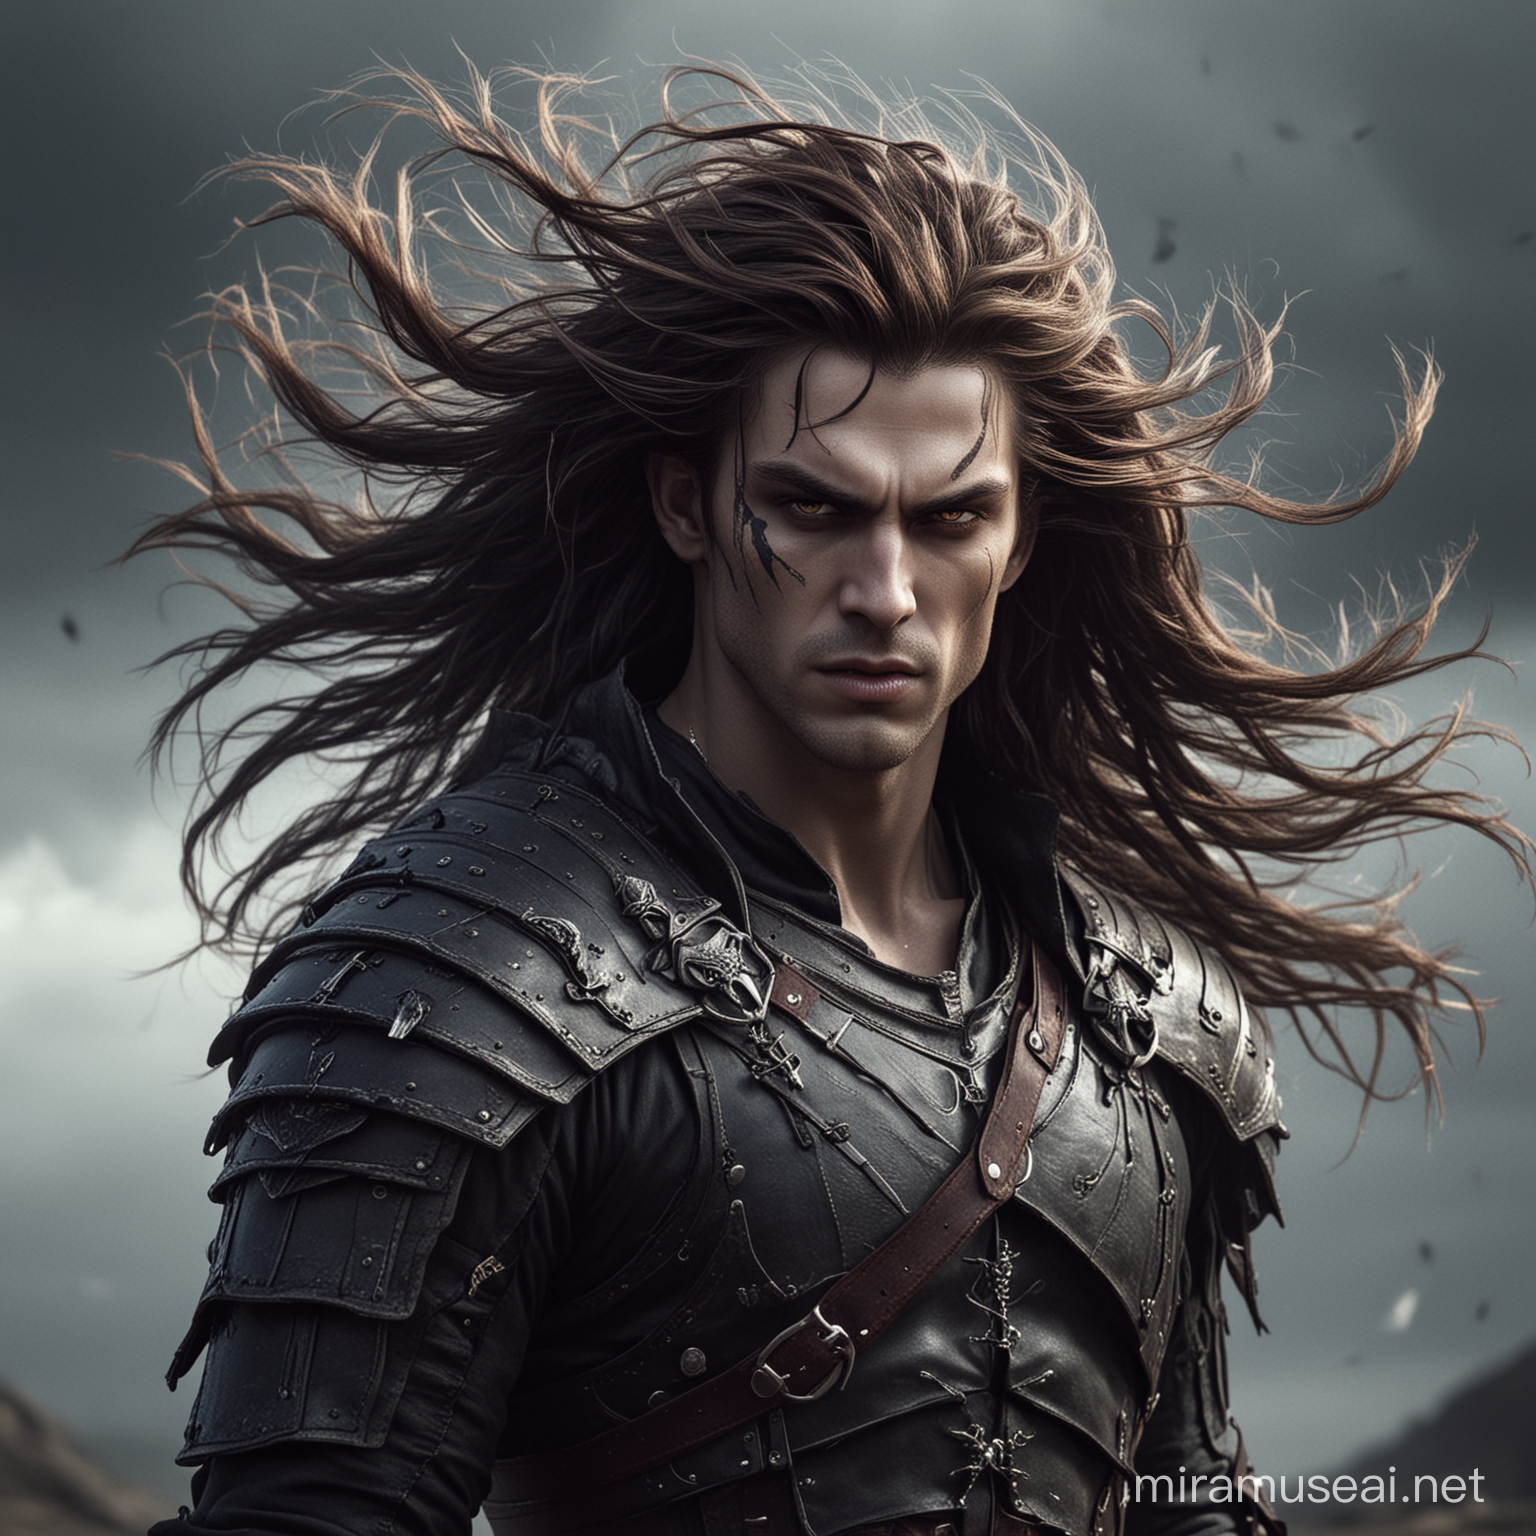 Futuristic Vampire Warrior with Flowing Hair